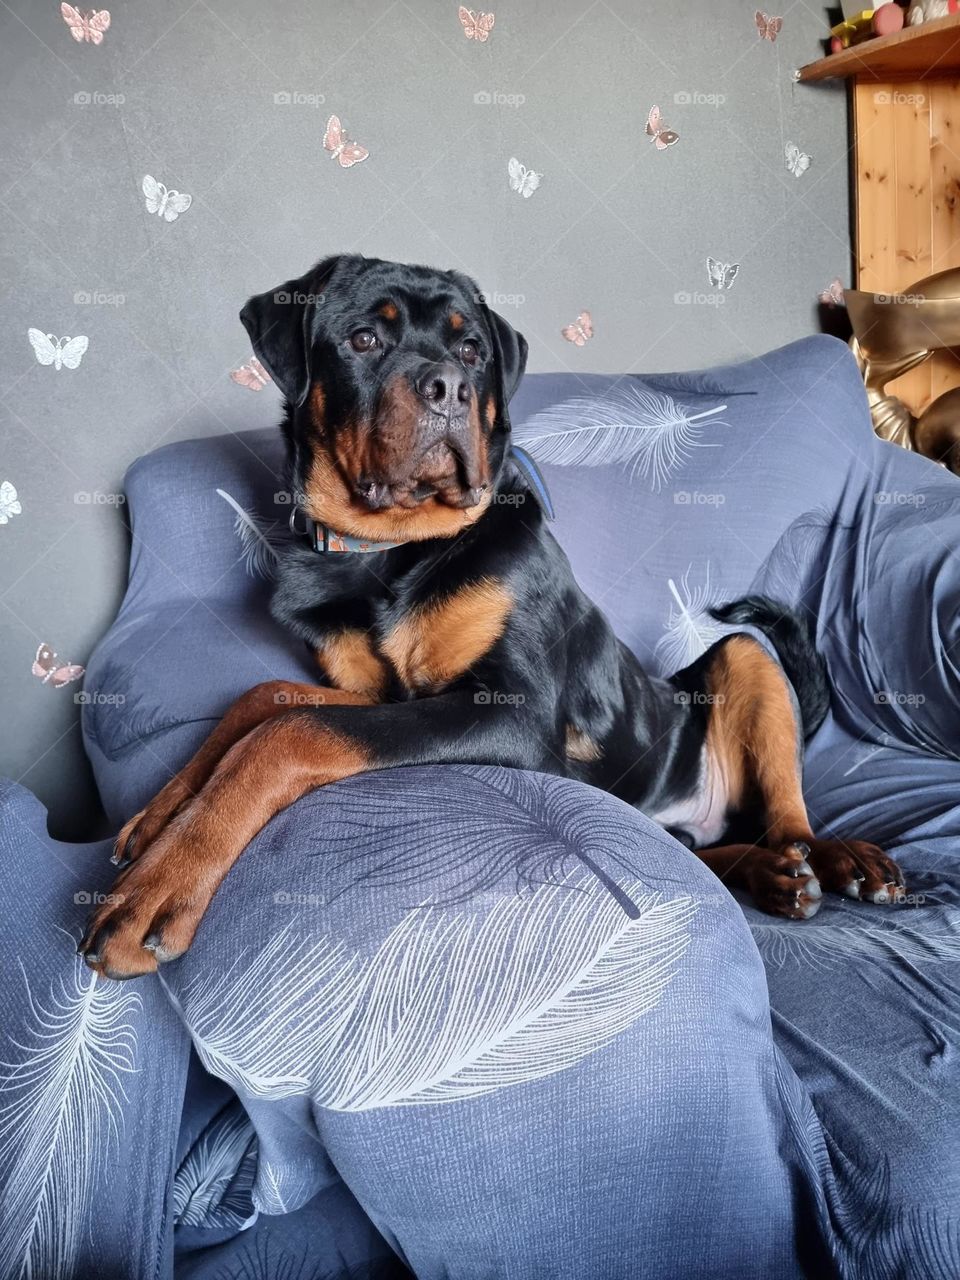 crash the 7 month old rotweiller pup